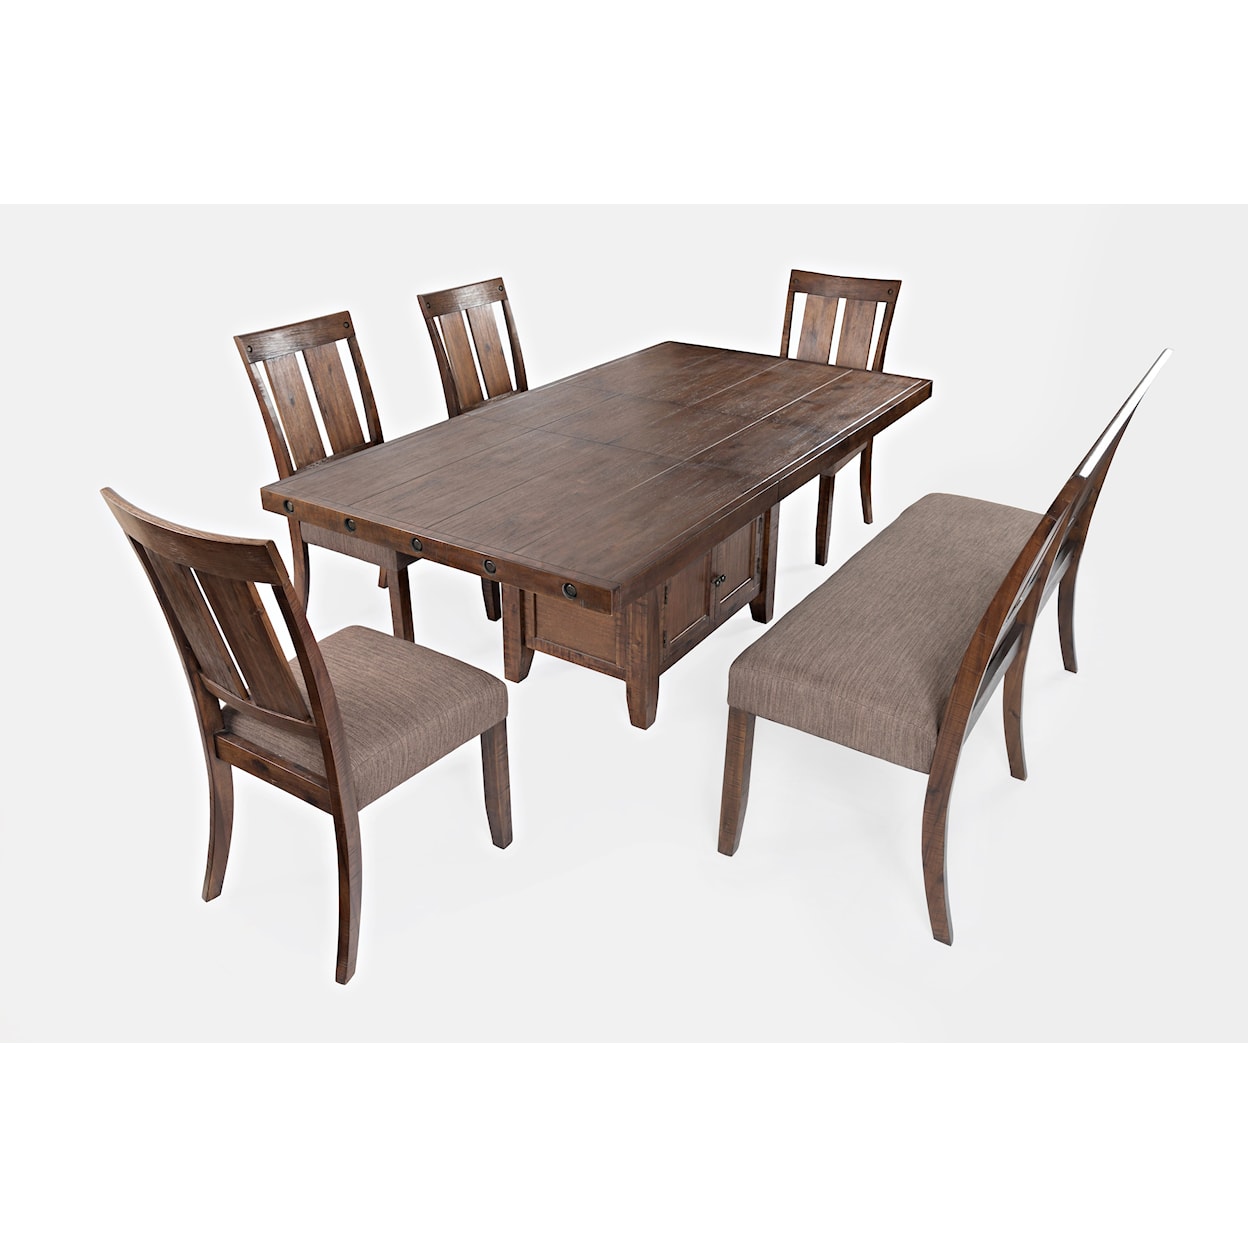 VFM Signature Mission Viejo Table and Chair Set with Bench